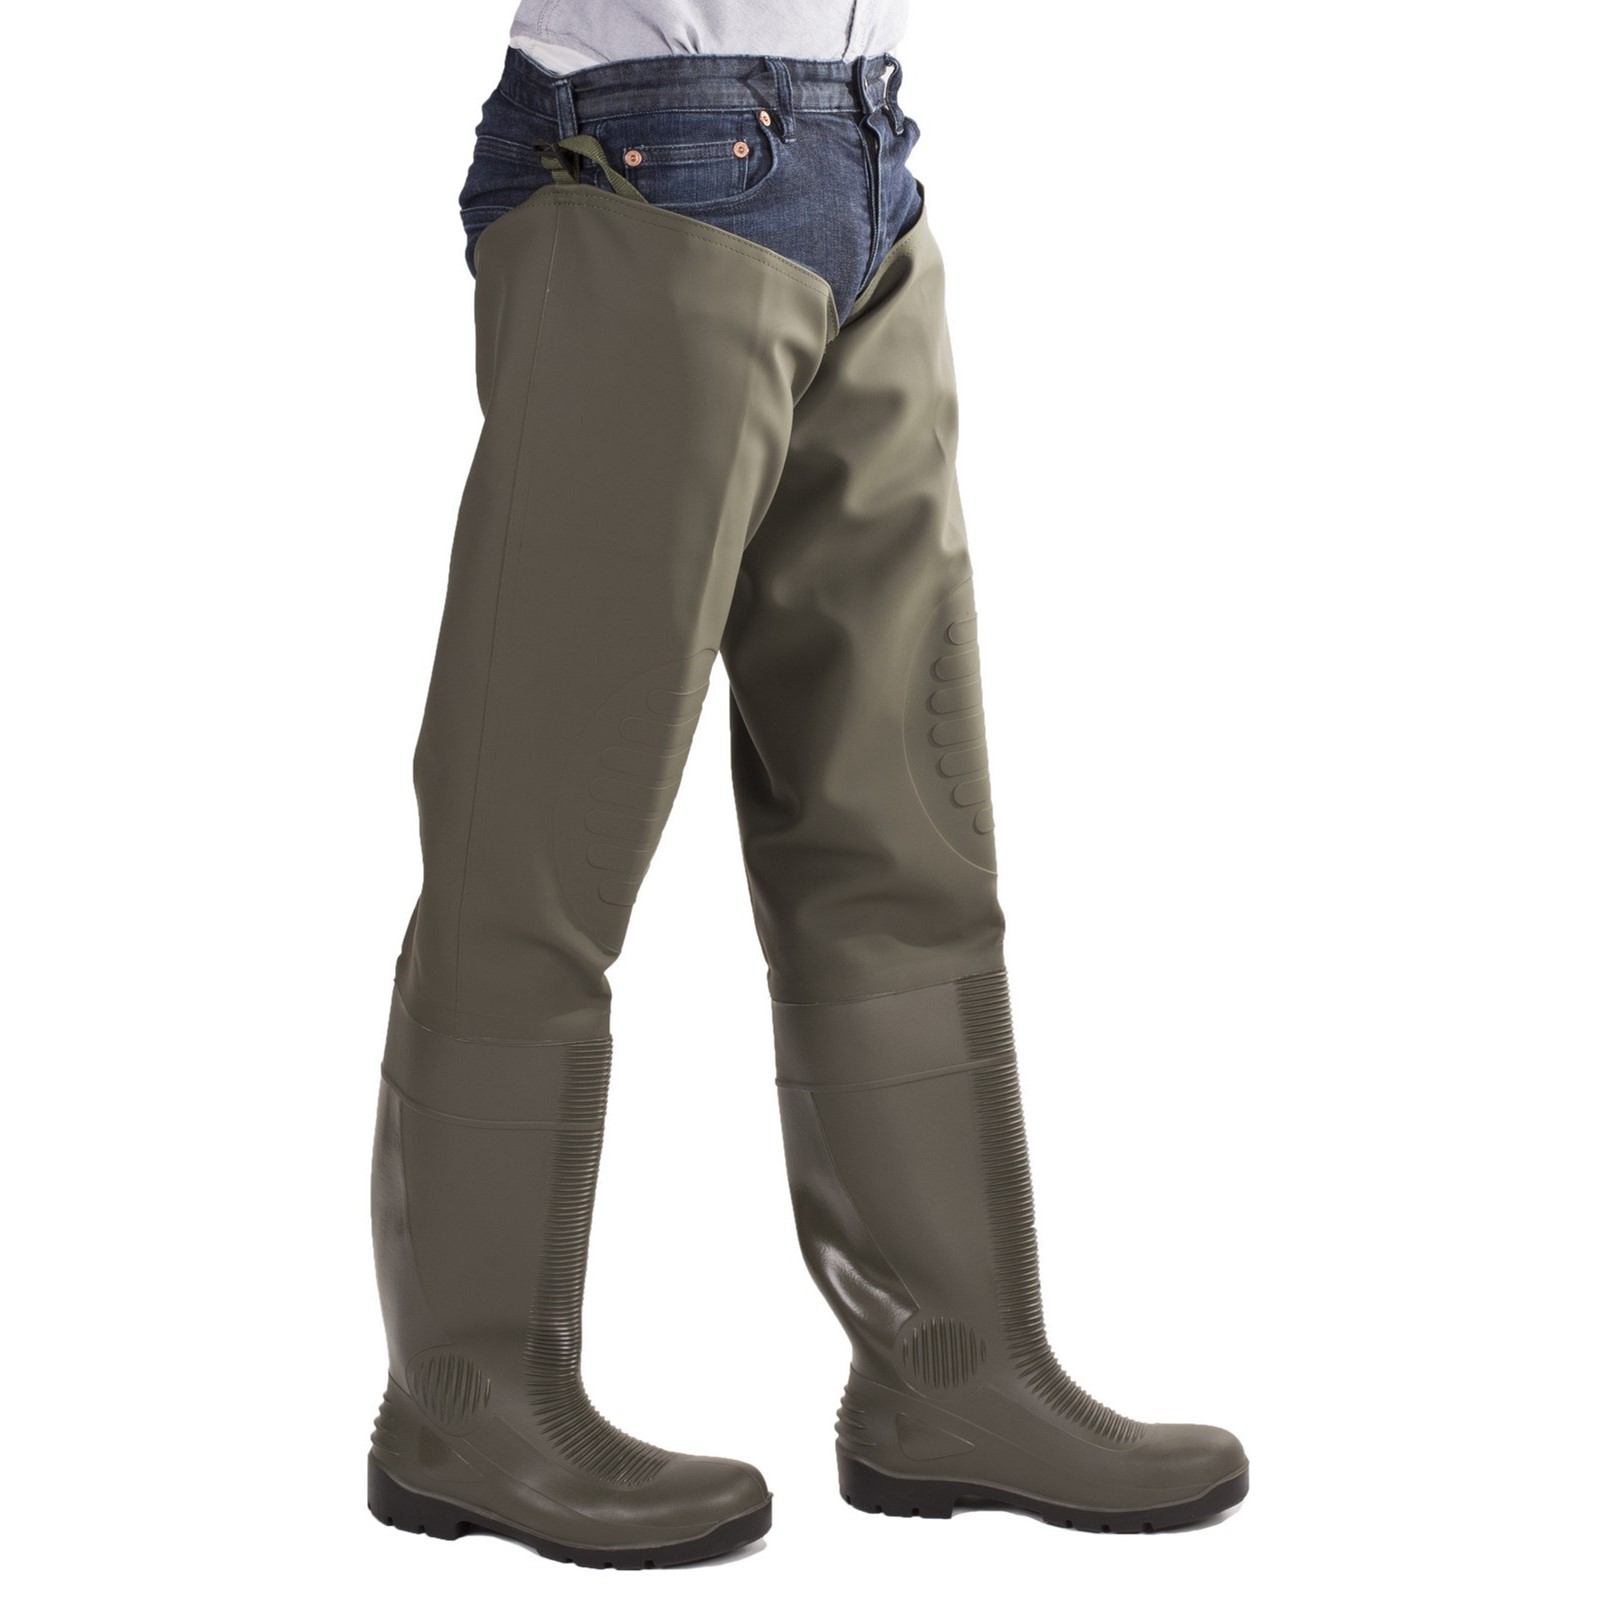 Forth Thigh Safety Wader